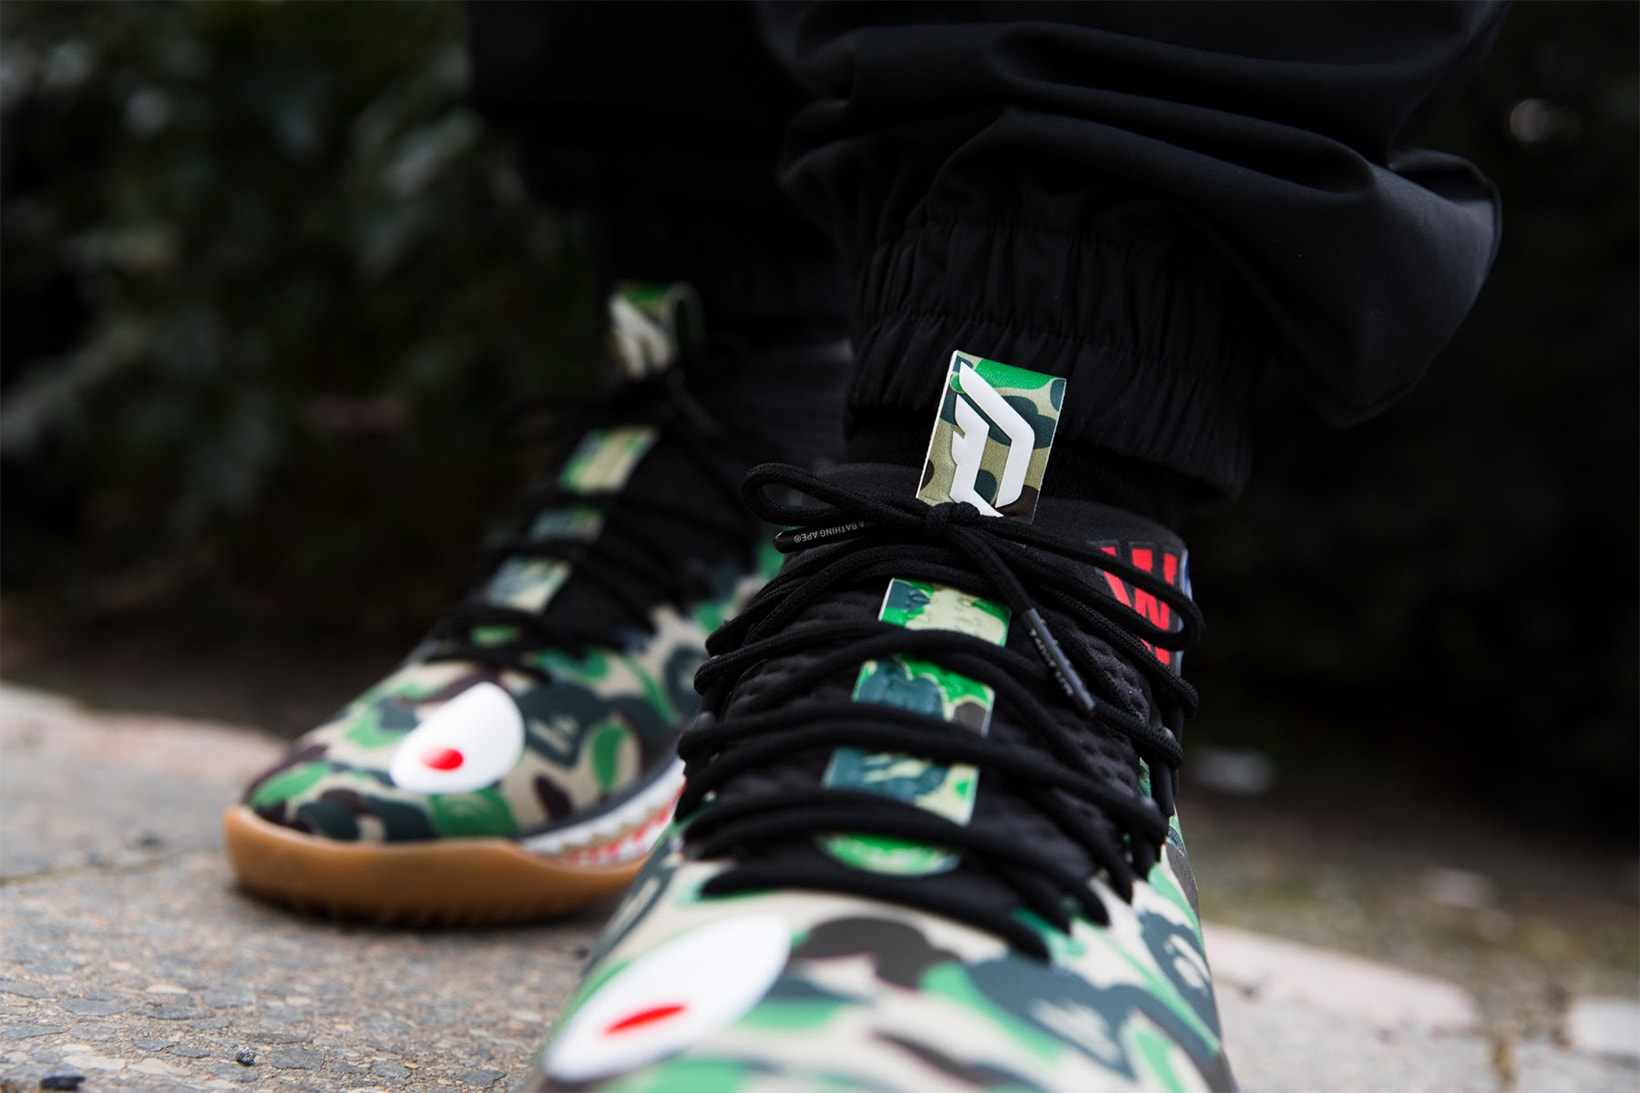 BAPE adidas Dame 4 Green Camo a bathing ape 2018 february release date info all star game sneakers shoes footwear overkill berlin